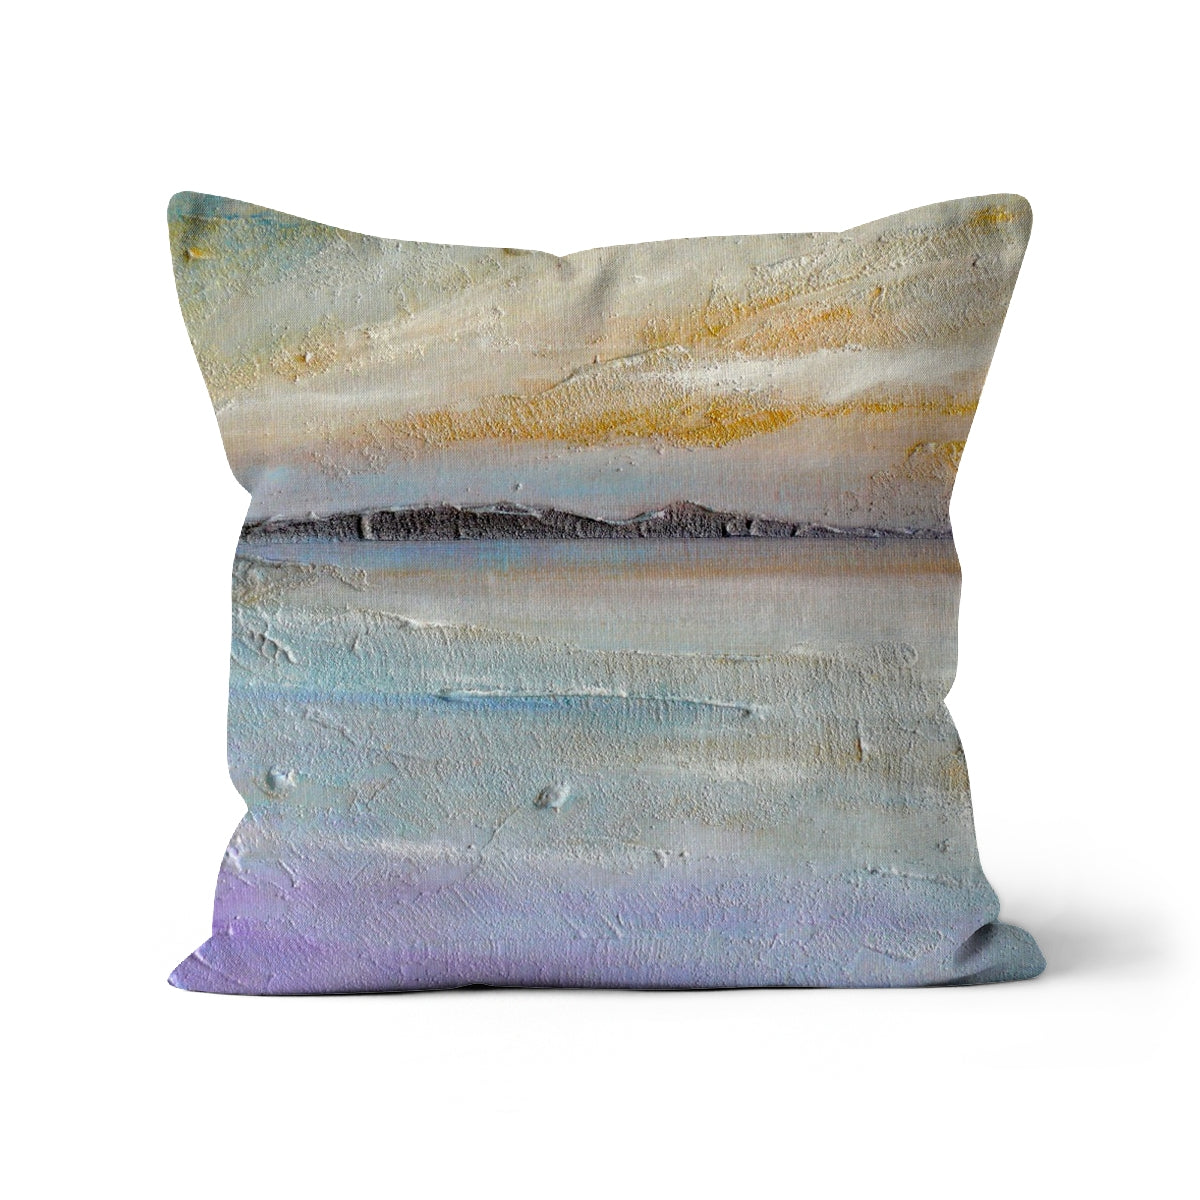 Sollas Beach North Uist Art Gifts Cushion-Cushions-Hebridean Islands Art Gallery-Canvas-12"x12"-Paintings, Prints, Homeware, Art Gifts From Scotland By Scottish Artist Kevin Hunter